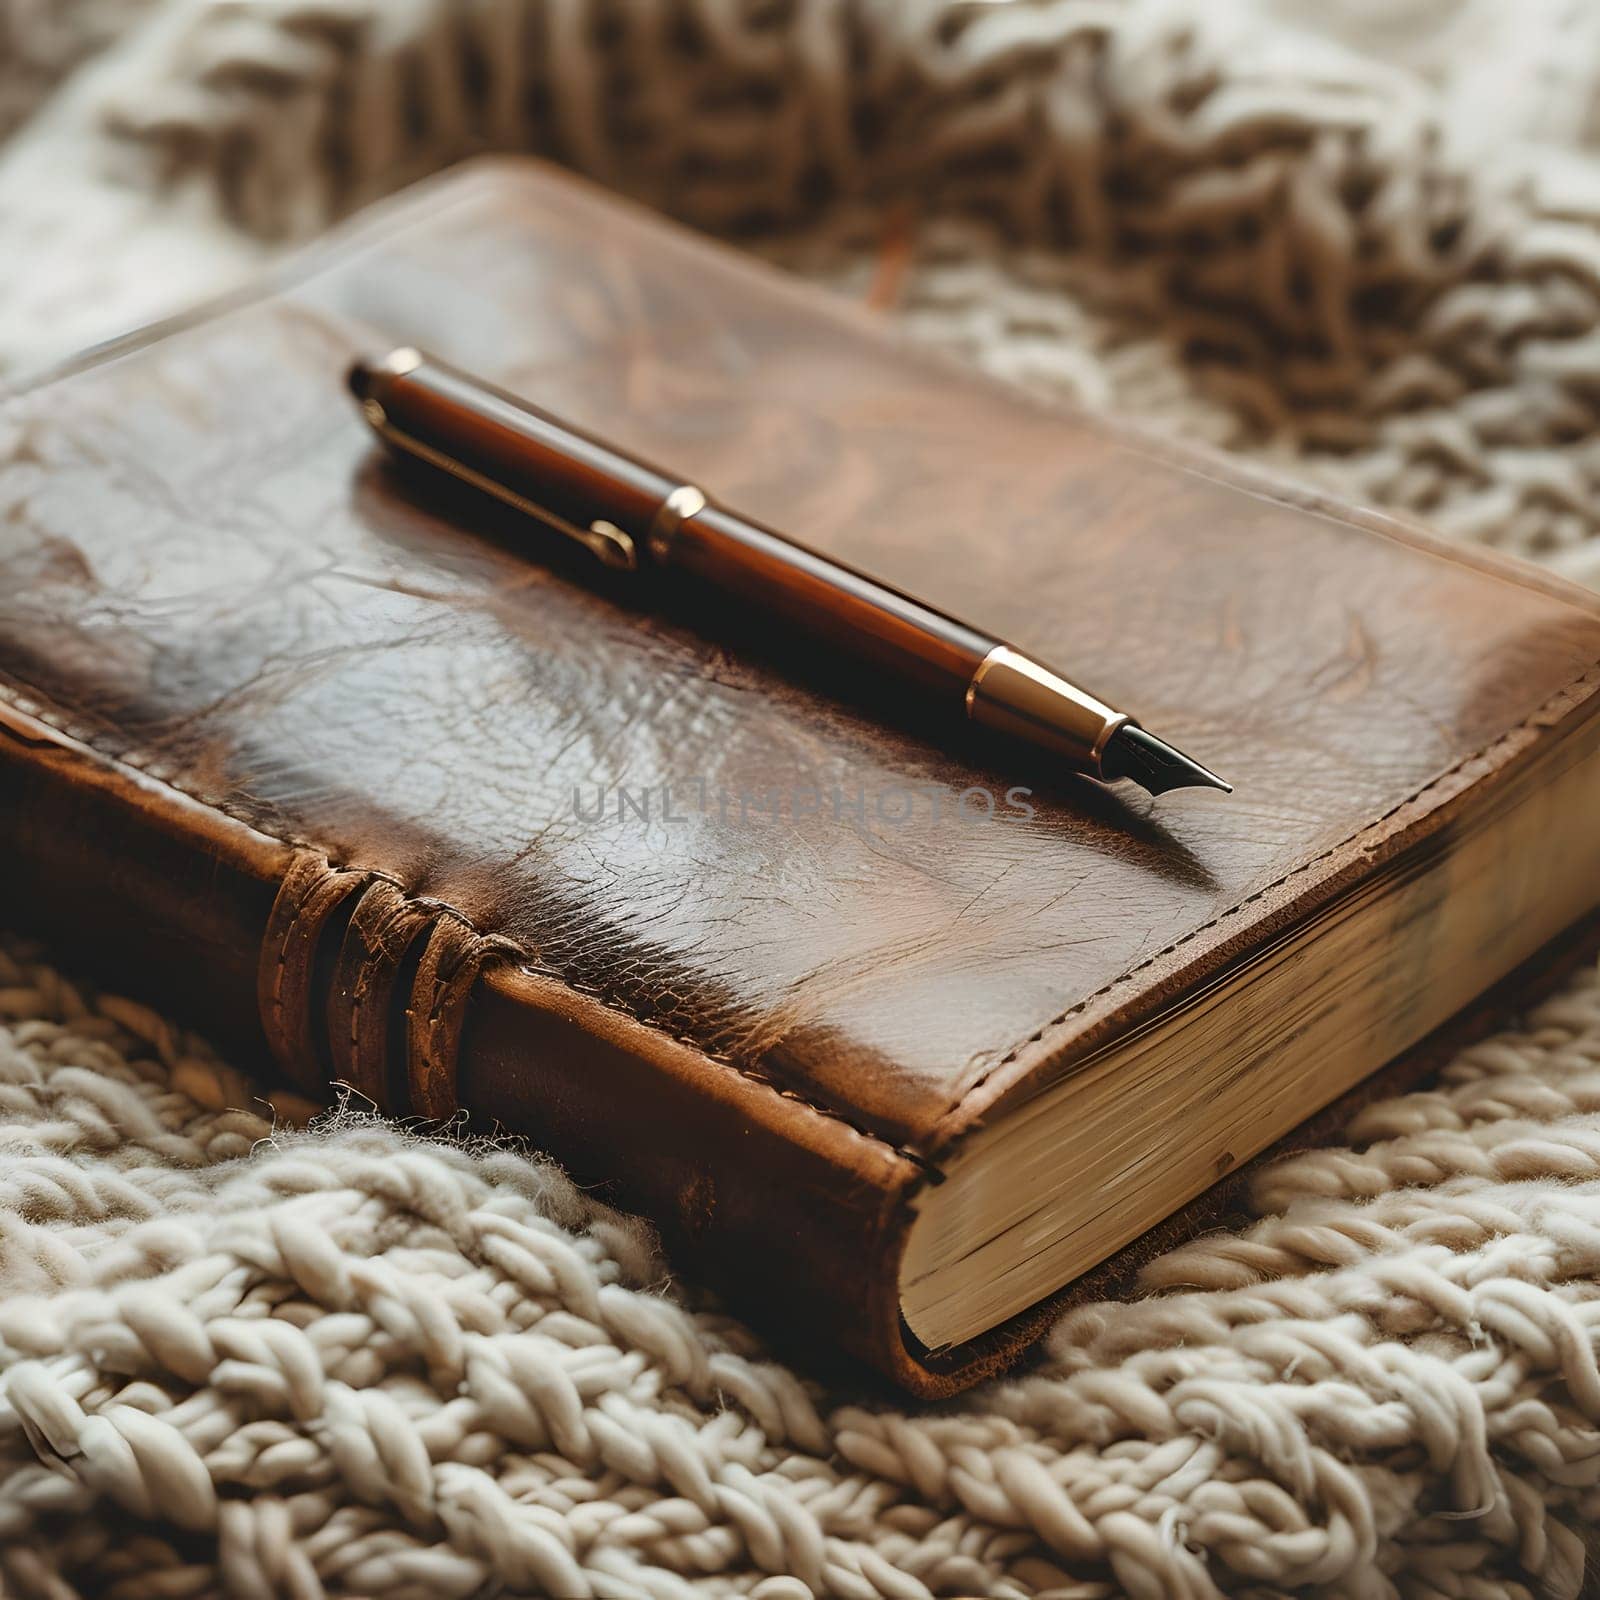 Brown leather book with pen on top, resting on hardwood surface by Nadtochiy